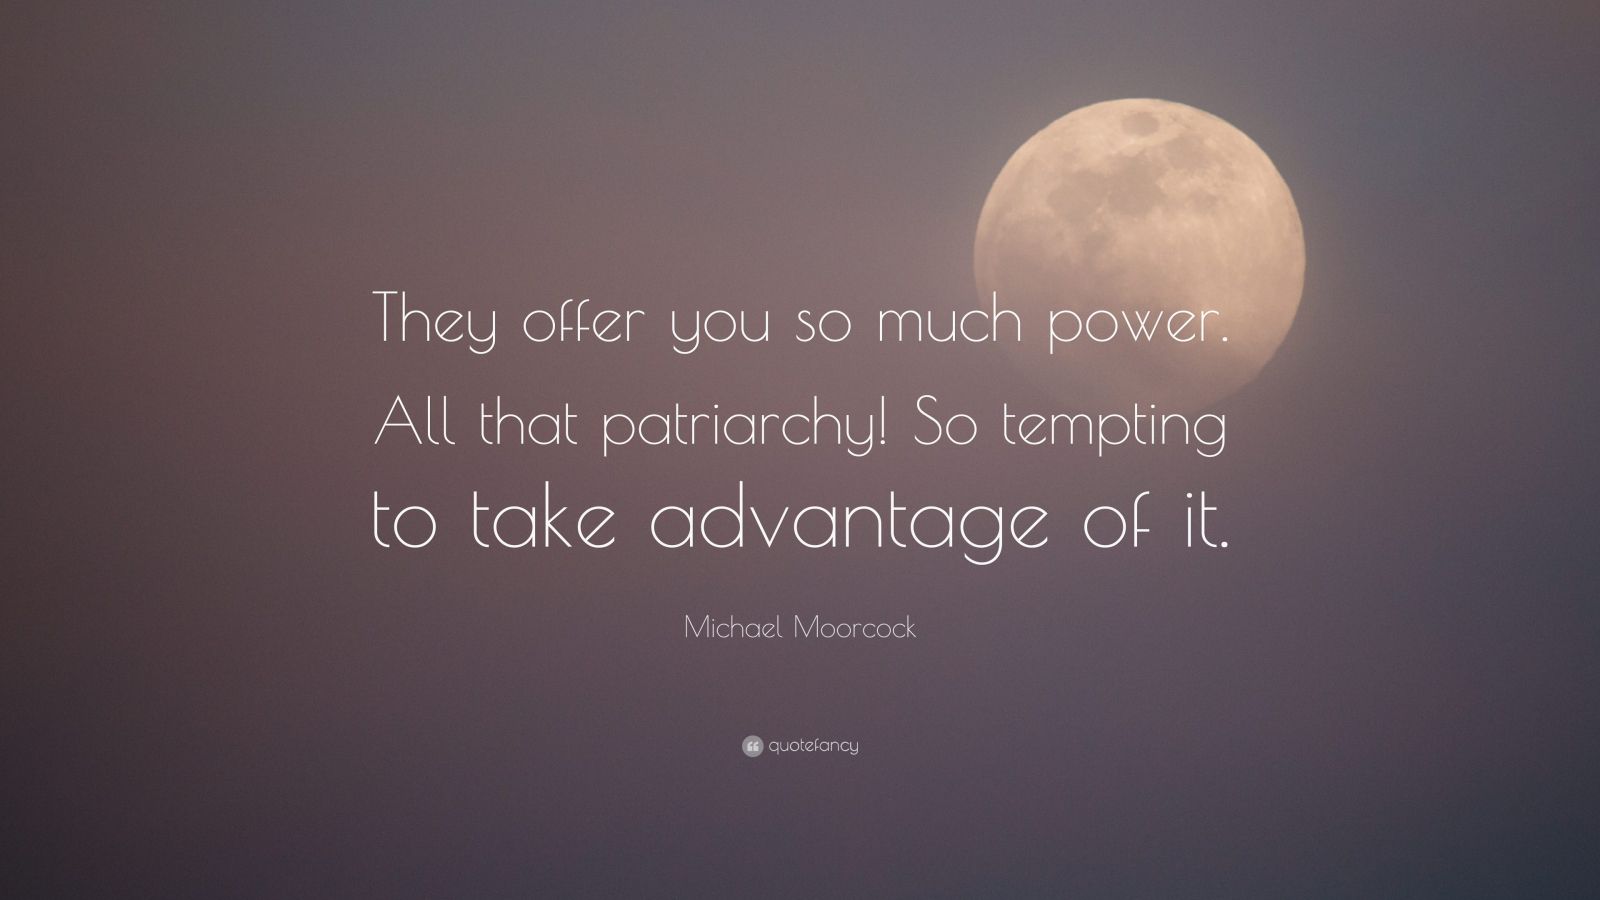 Michael Moorcock Quote “they Offer You So Much Power All That Patriarchy So Tempting To Take